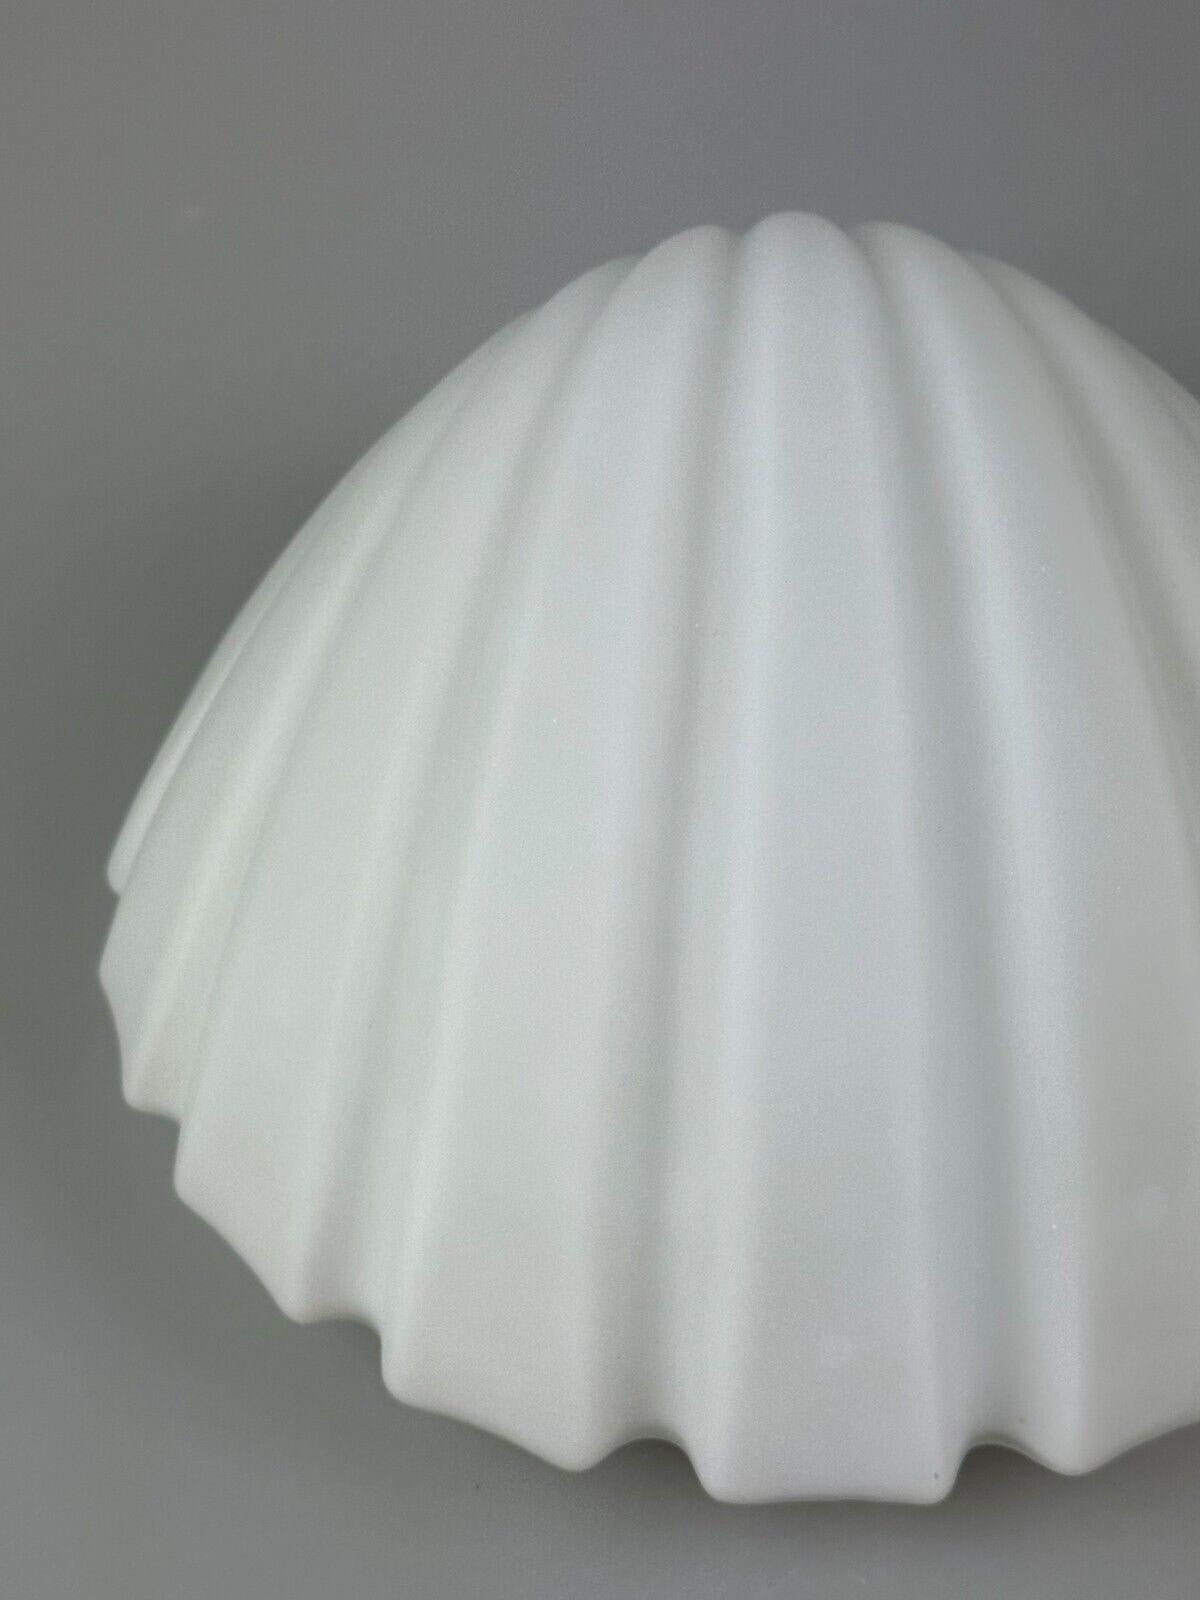 60s 70s wall lamp shell Glashütte Limburg Germany Space Age design For Sale 6